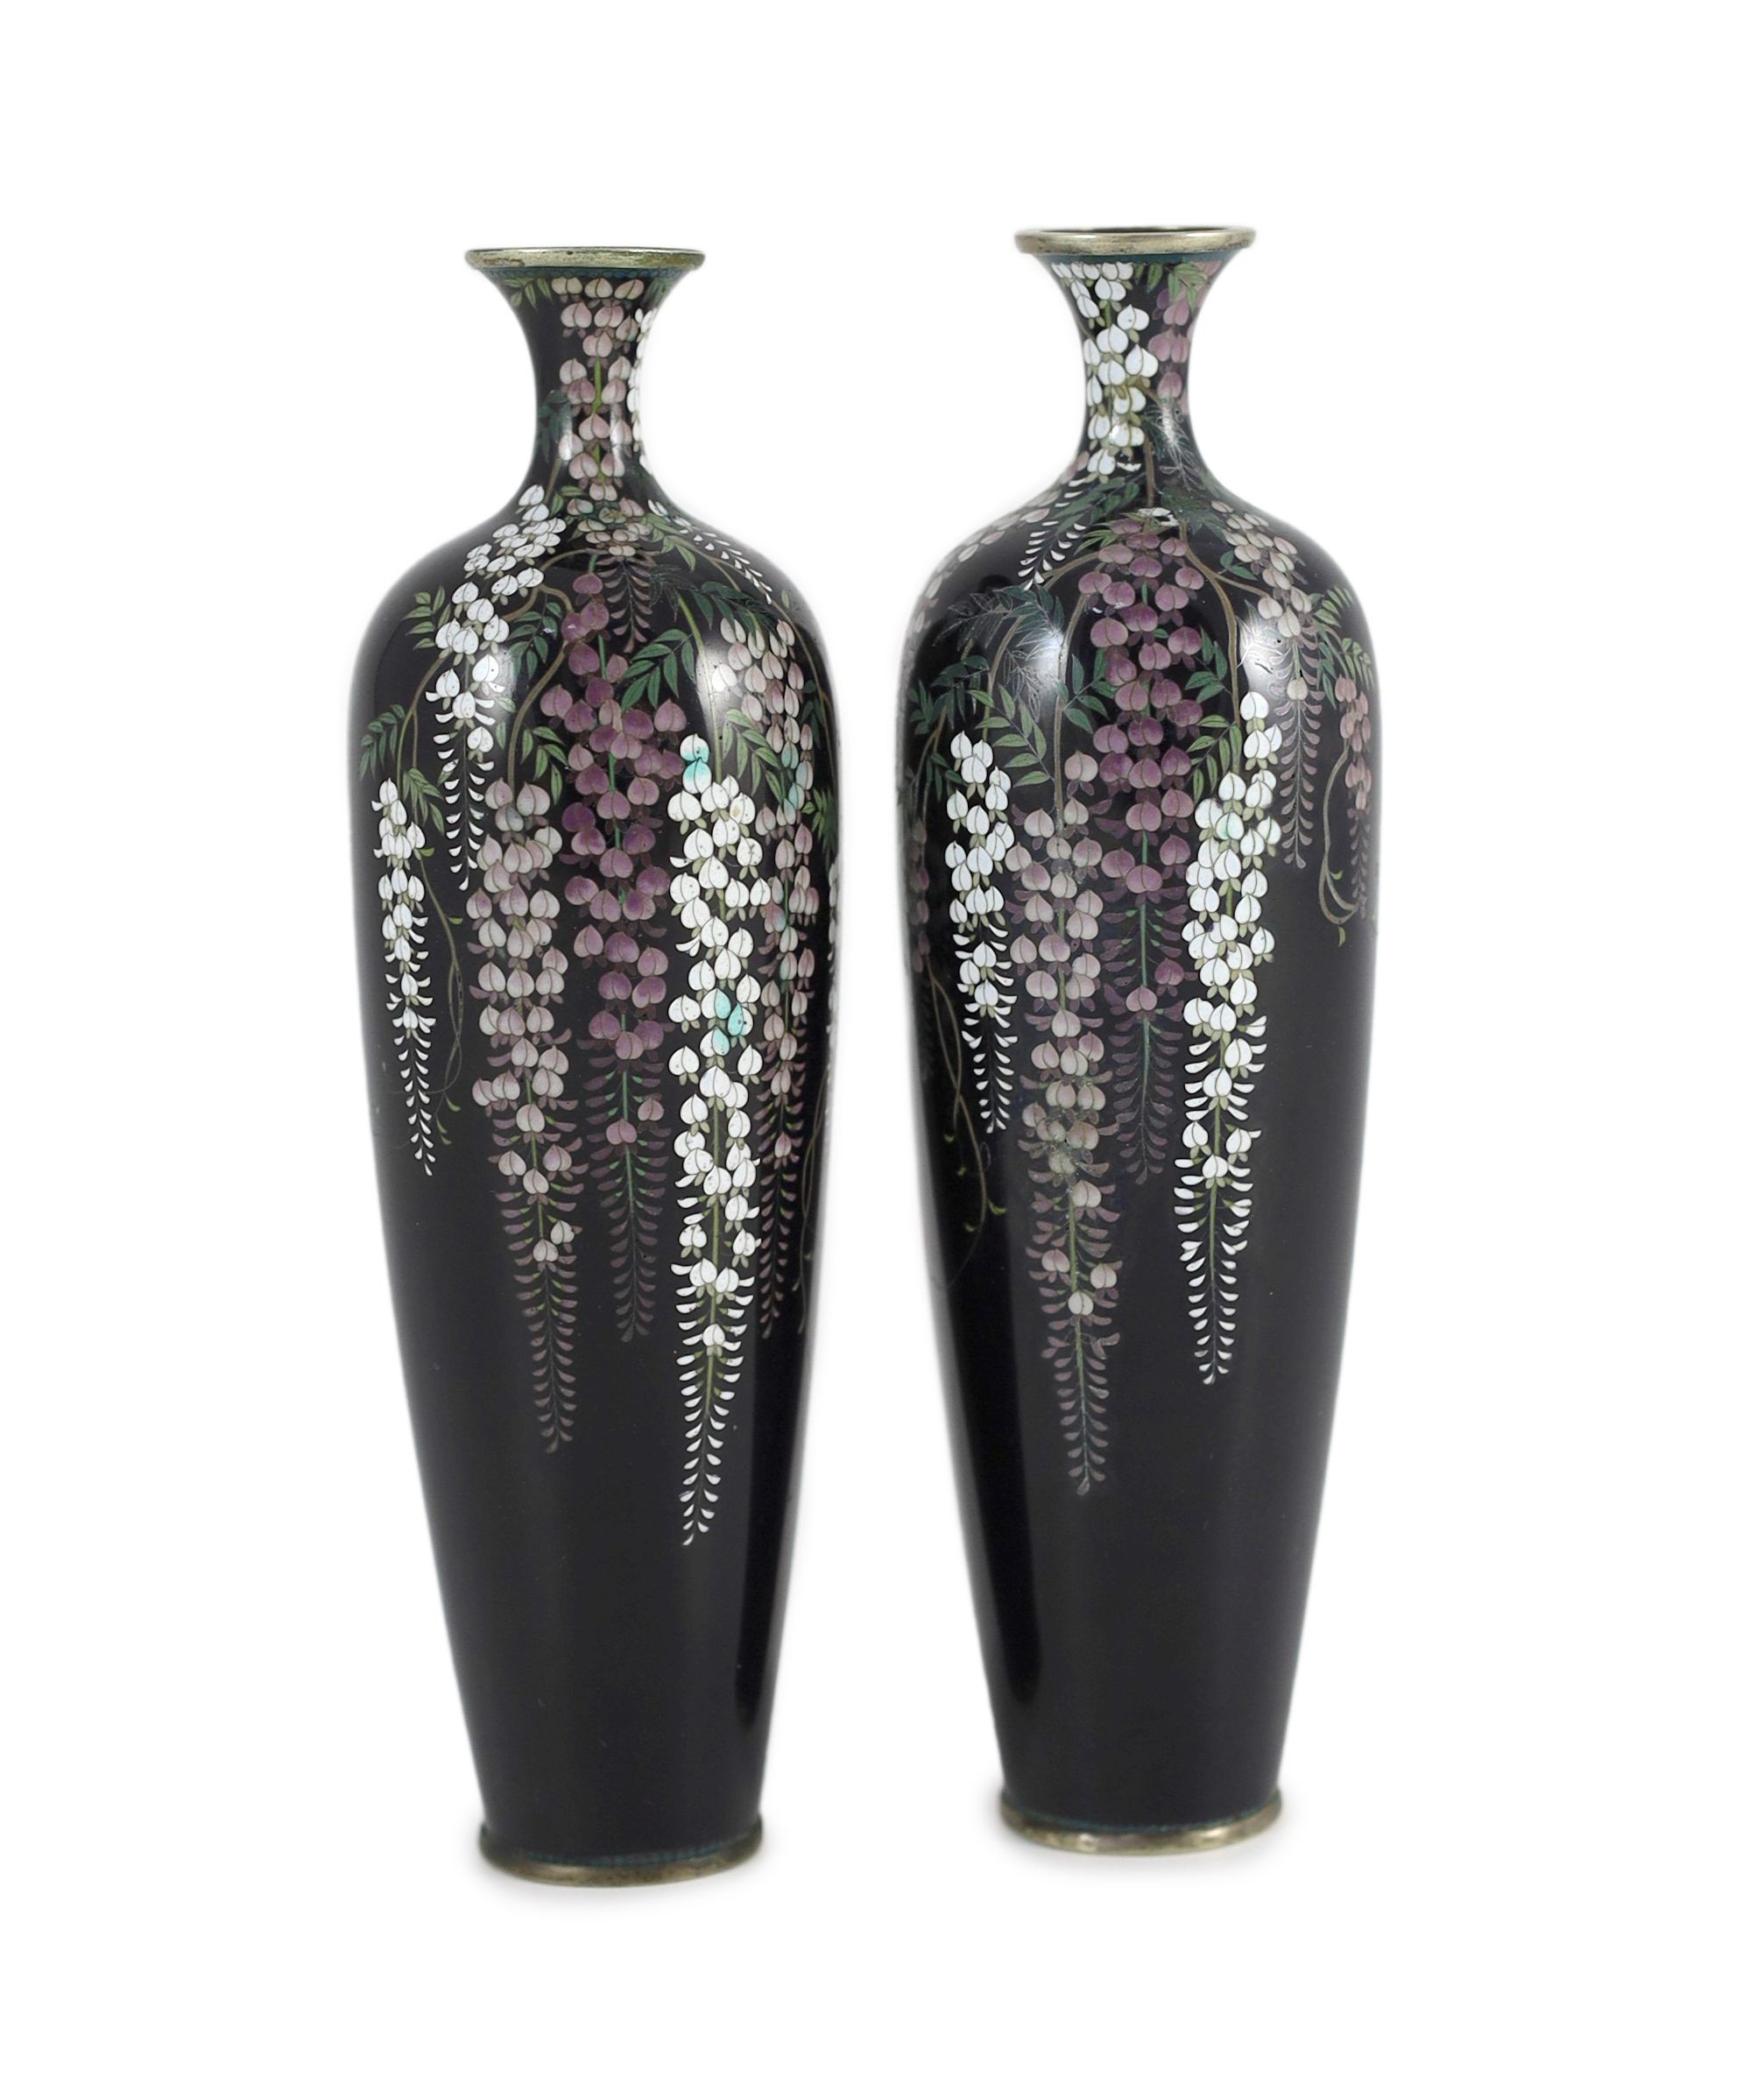 A pair of fine Japanese cloisonné enamel vases, by Inaba Nanaho Studio, Kyoto, Meiji Period, 15.3 cm high                                                                                                                   